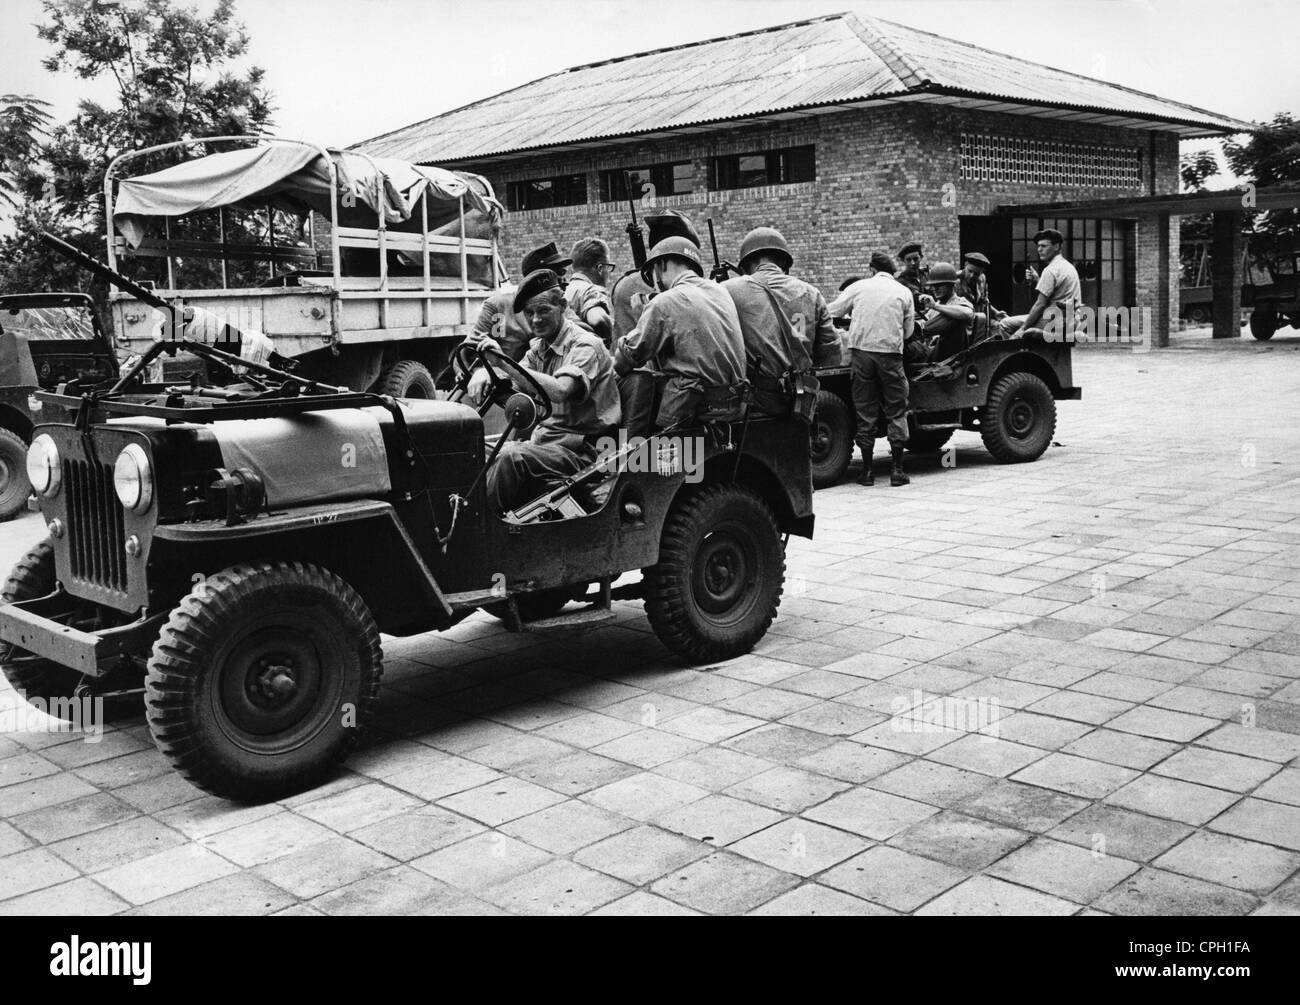 geography/travel, Congo, events, Simba uprising 1964 - 1965, mercenaries with jeeps, Lisala, Equateur province, 6.10.1964, Democratic Republic of the Congo, Congo Crisis, Civil War, military, arms, Africa, 20th century, historic, historical, Willy's Jeep, 1960s, people, Additional-Rights-Clearences-Not Available Stock Photo